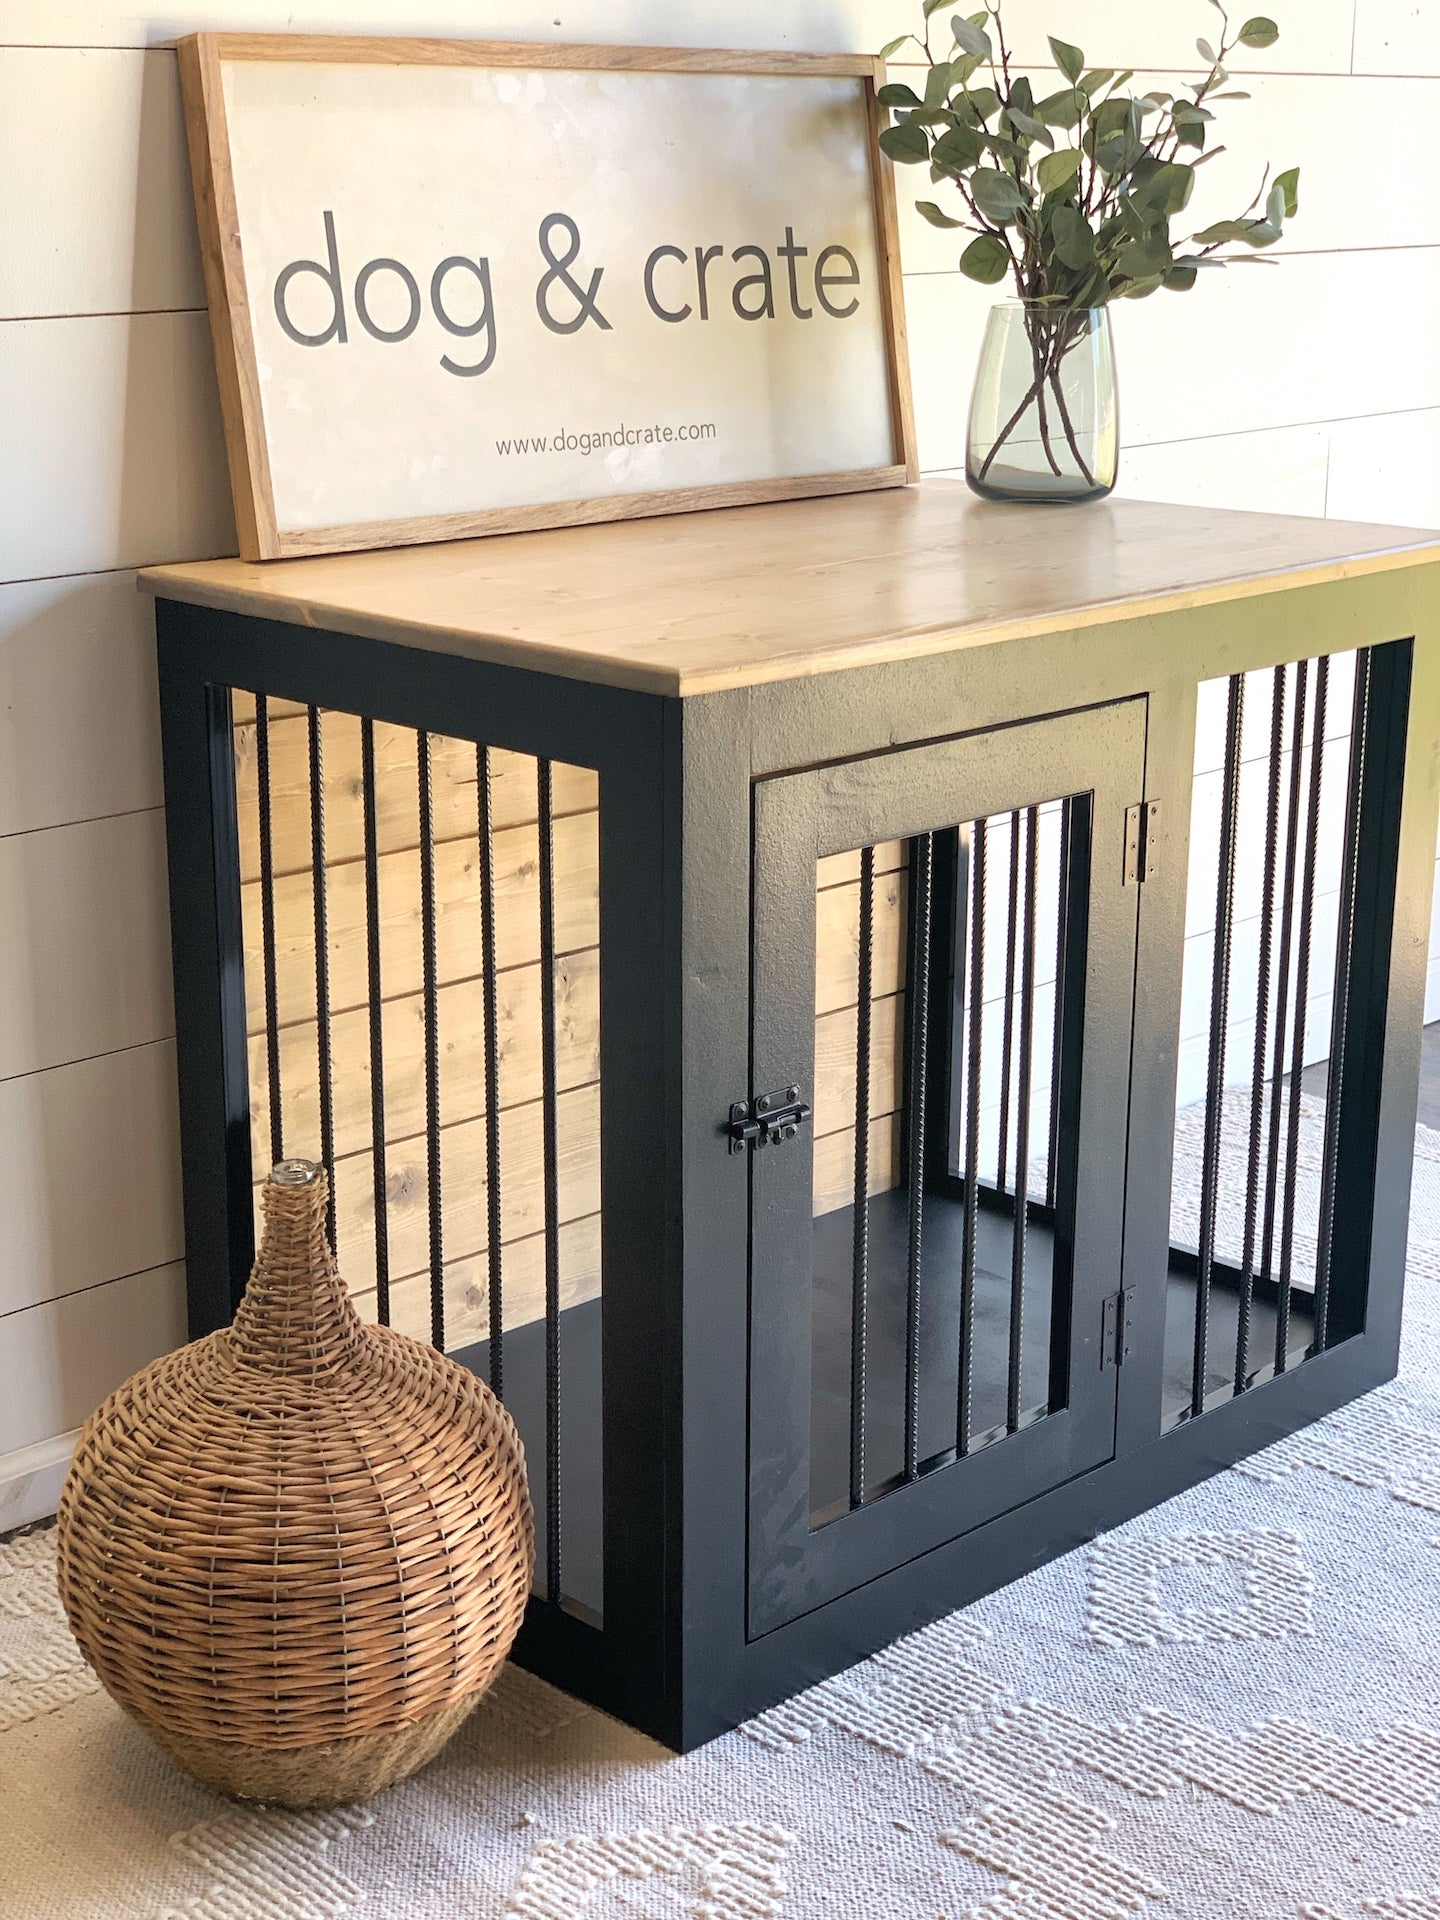 Luxury dog crate furniture plans